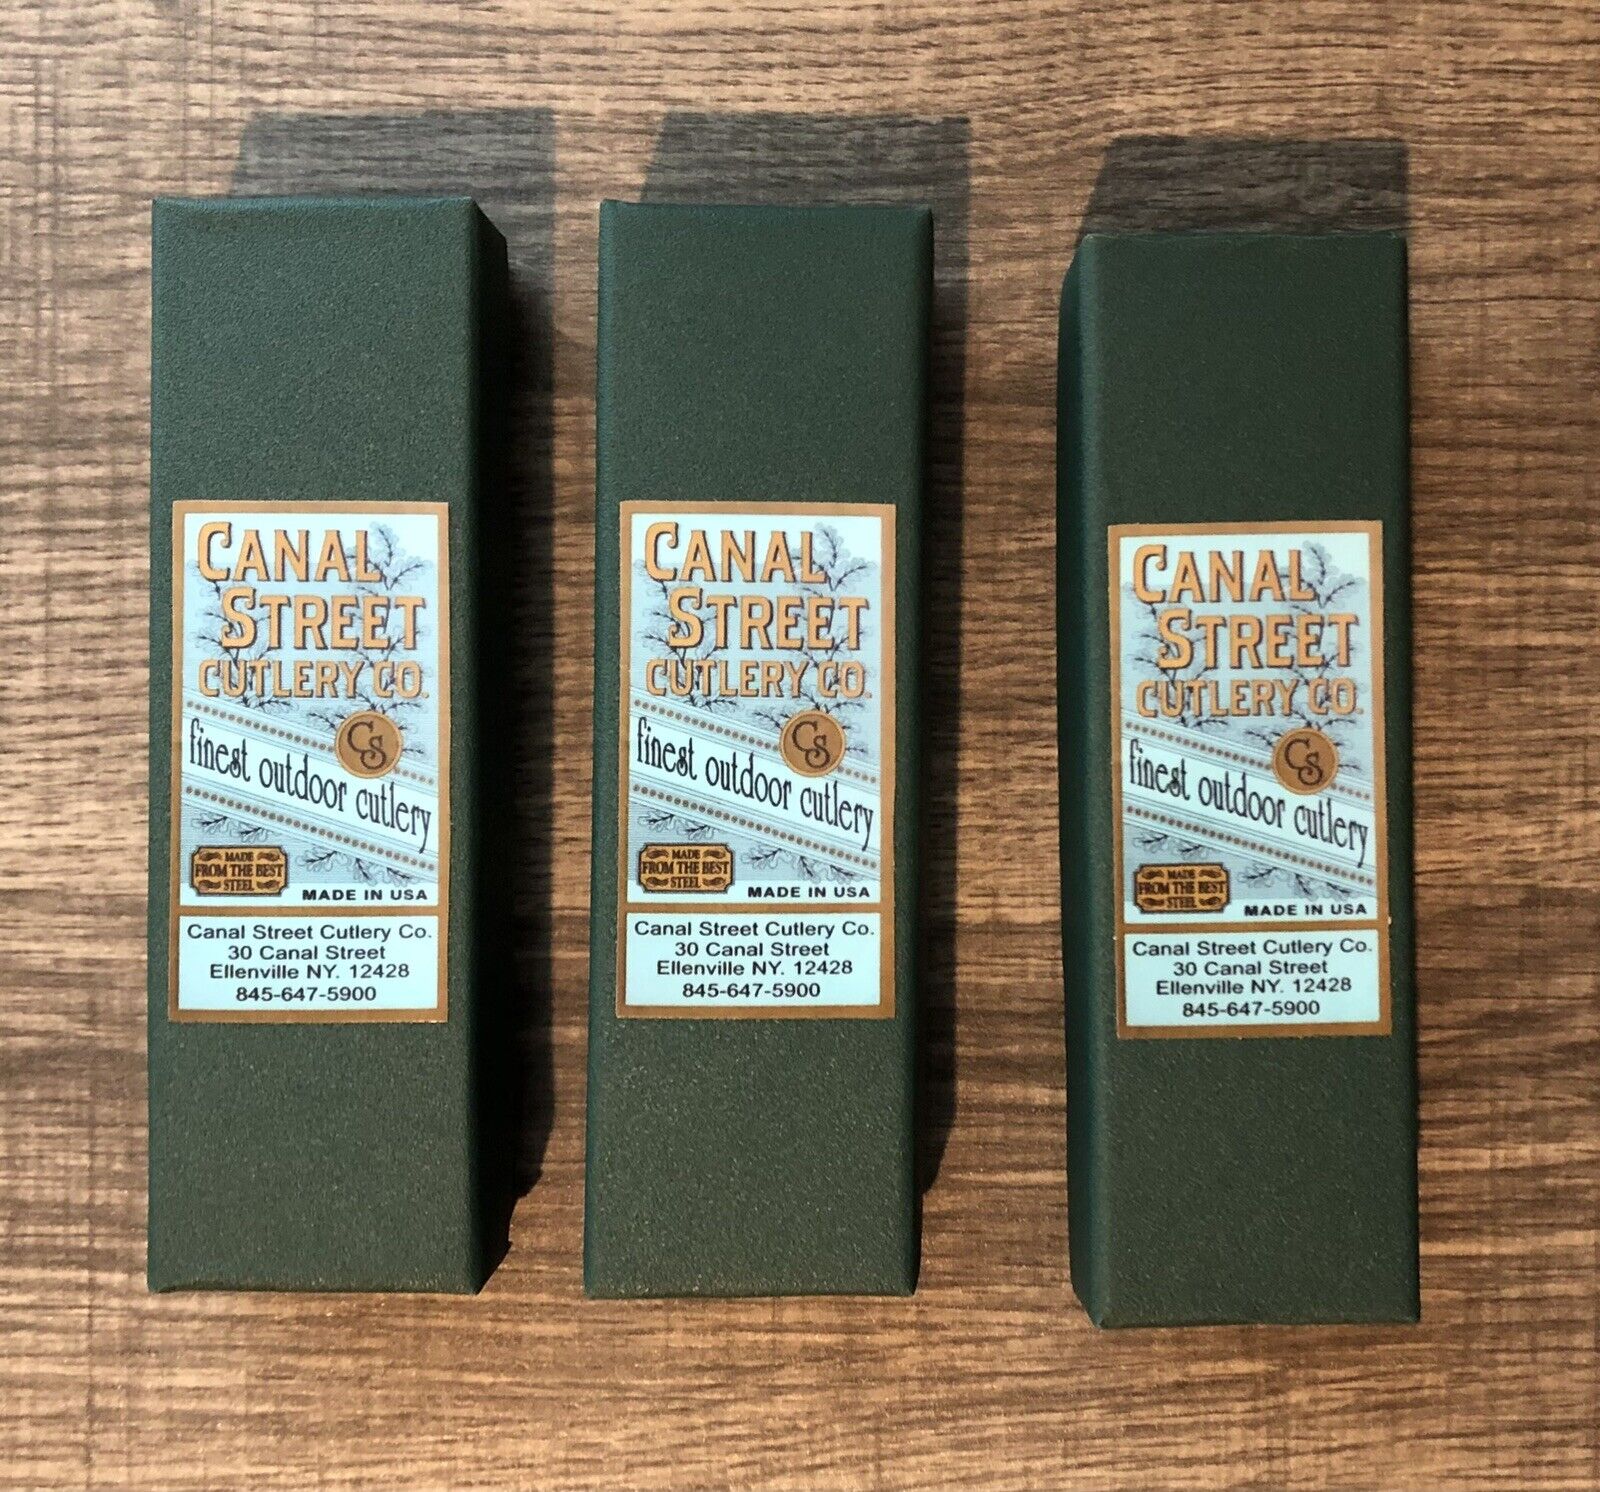 Canal Street Cutlery Knife - Reproduction Box Only - Fits Normal Size Folders